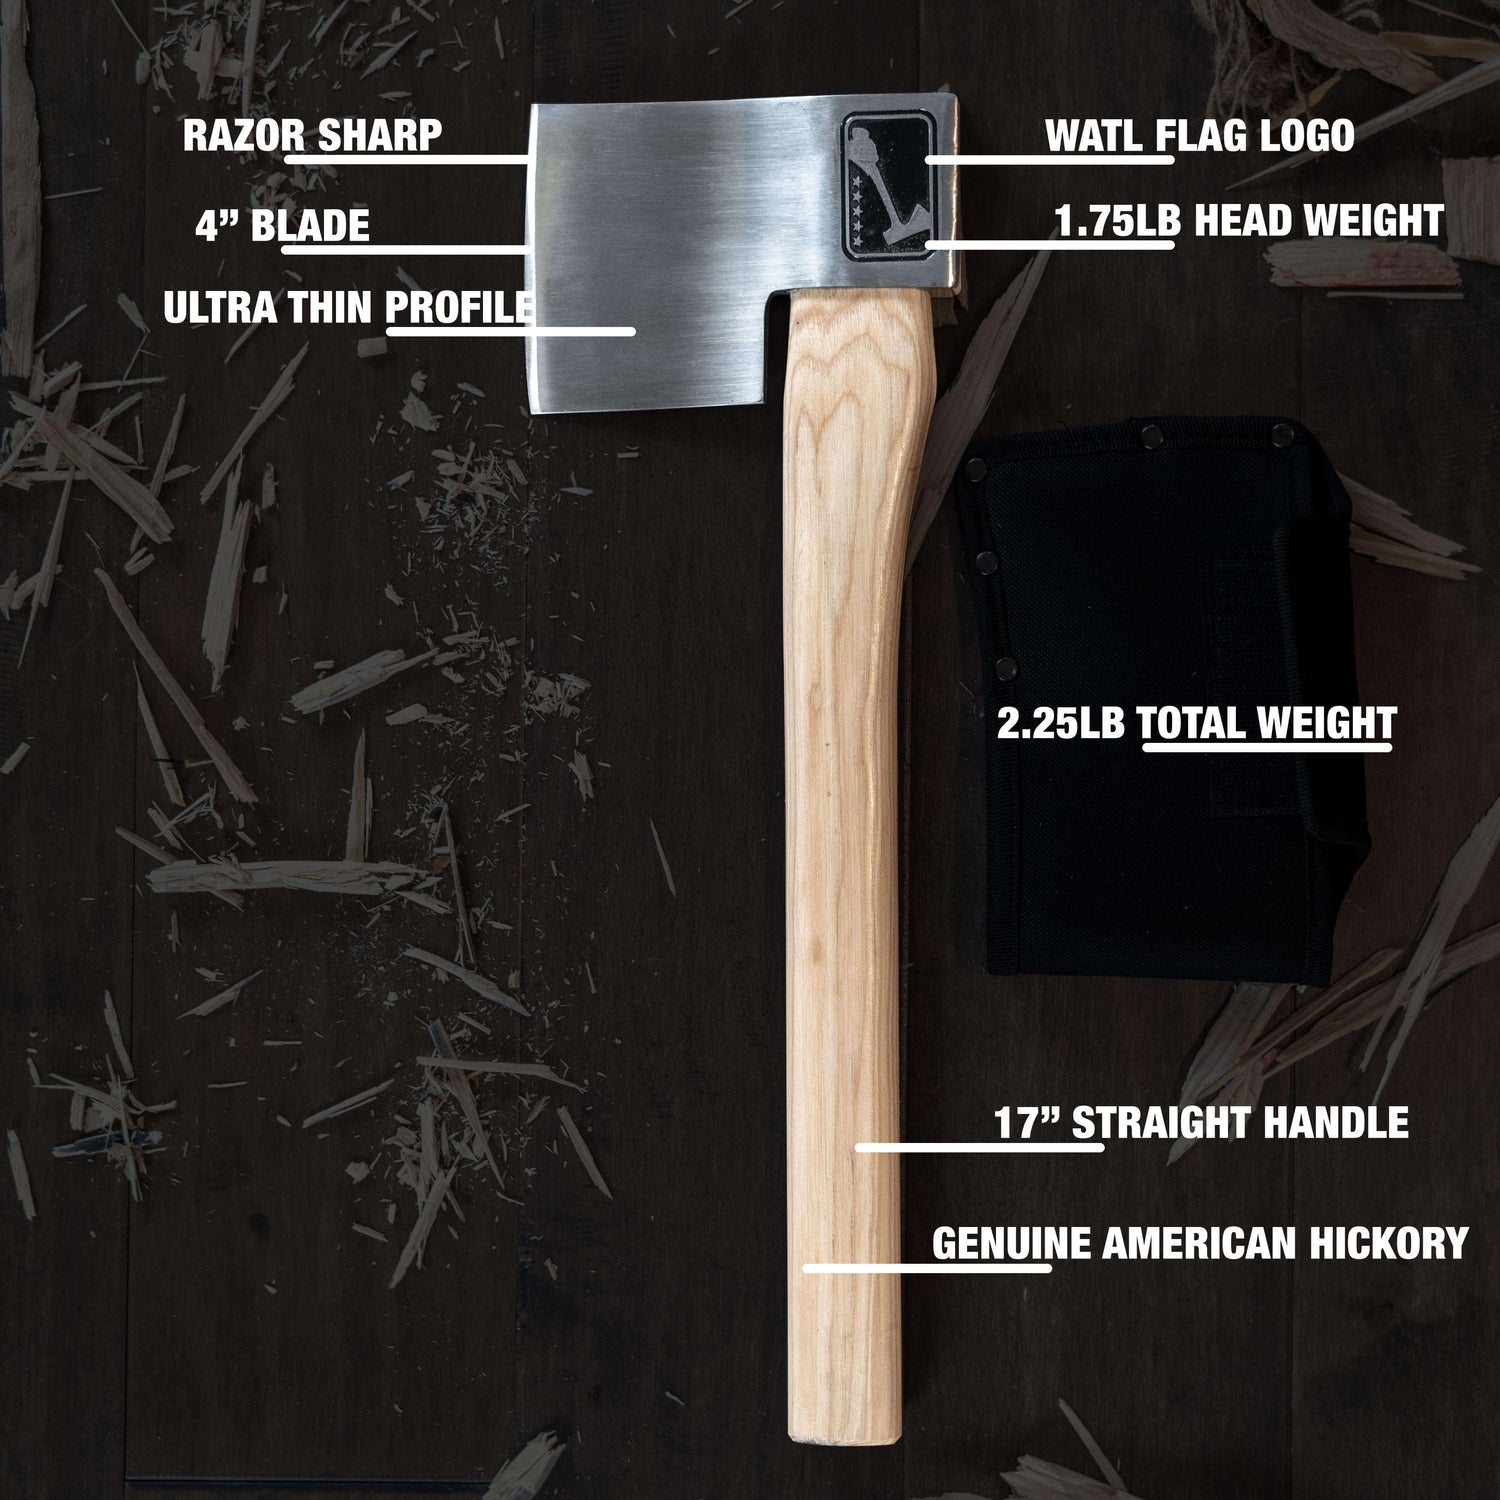 The Butcher Throwing Axe Explainer